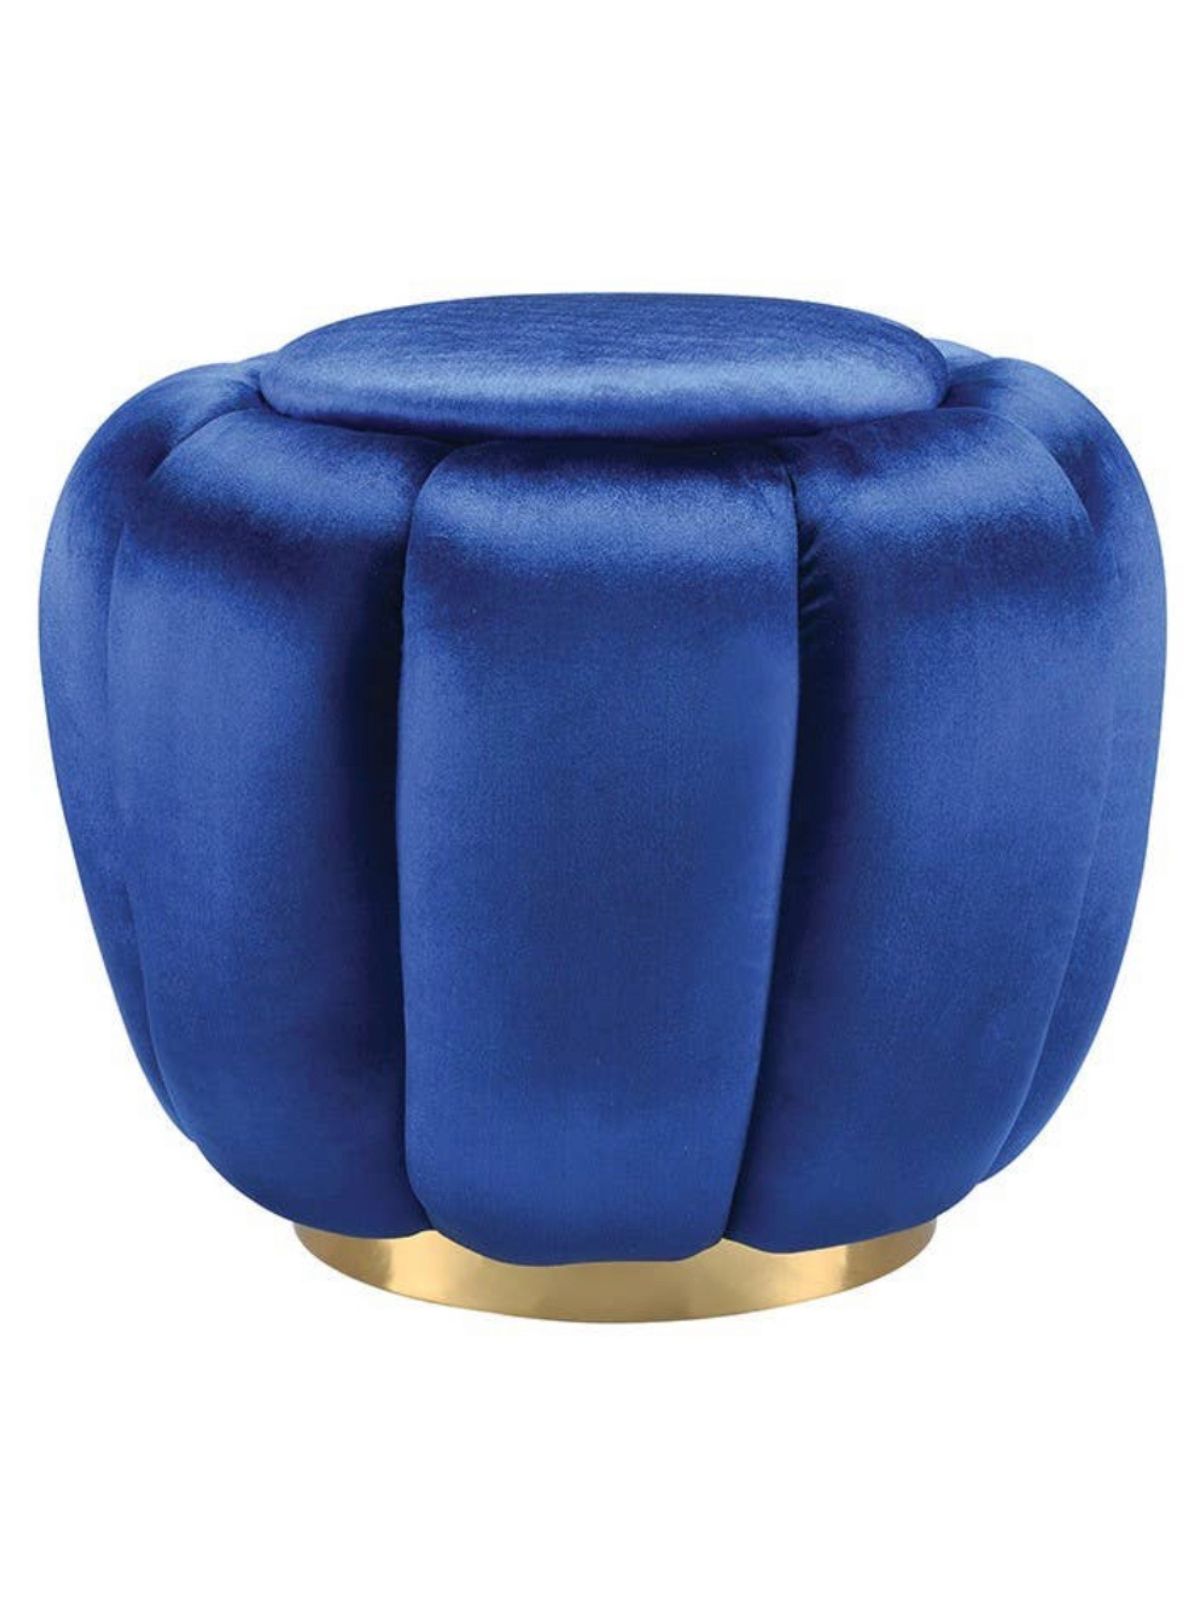 This Heiress ottoman is fully padded with sapphire blue velvet & has a metal round base in a gold finish. This design will go well with any home décor.